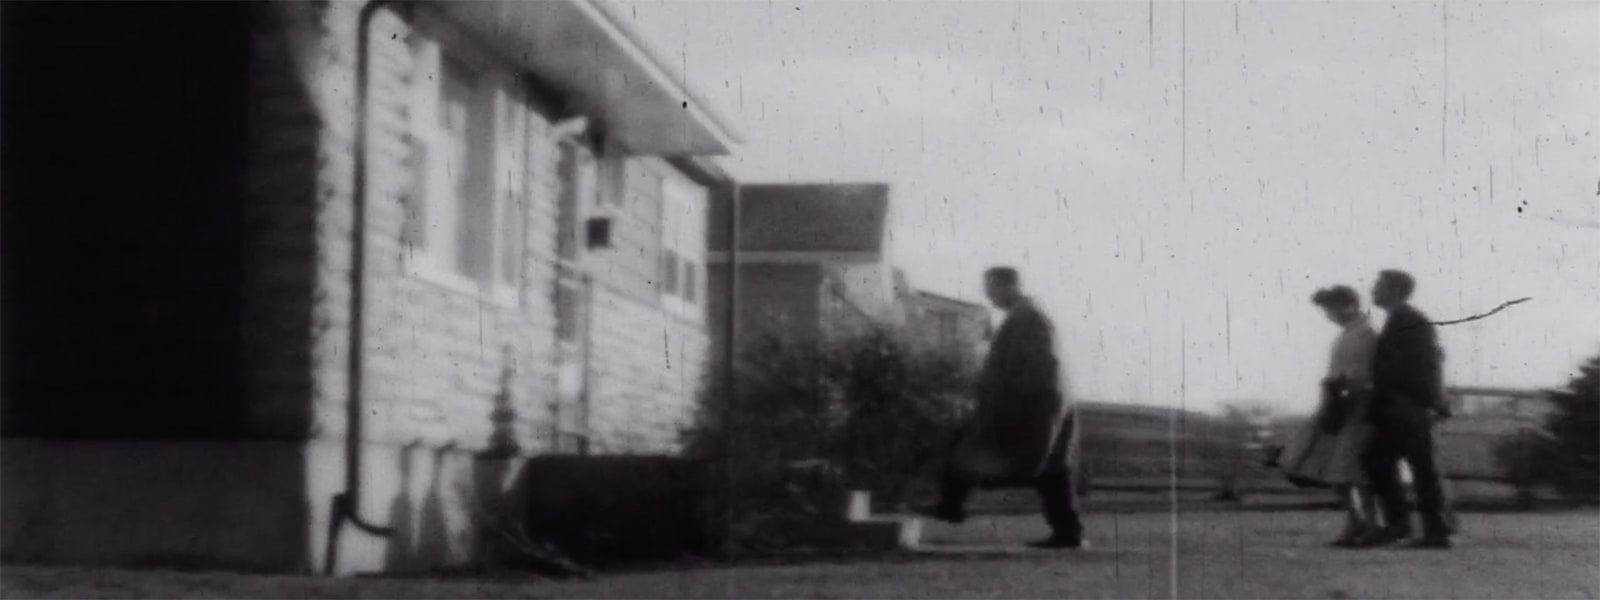 Still image of a man and a couple approaching a house for rent.